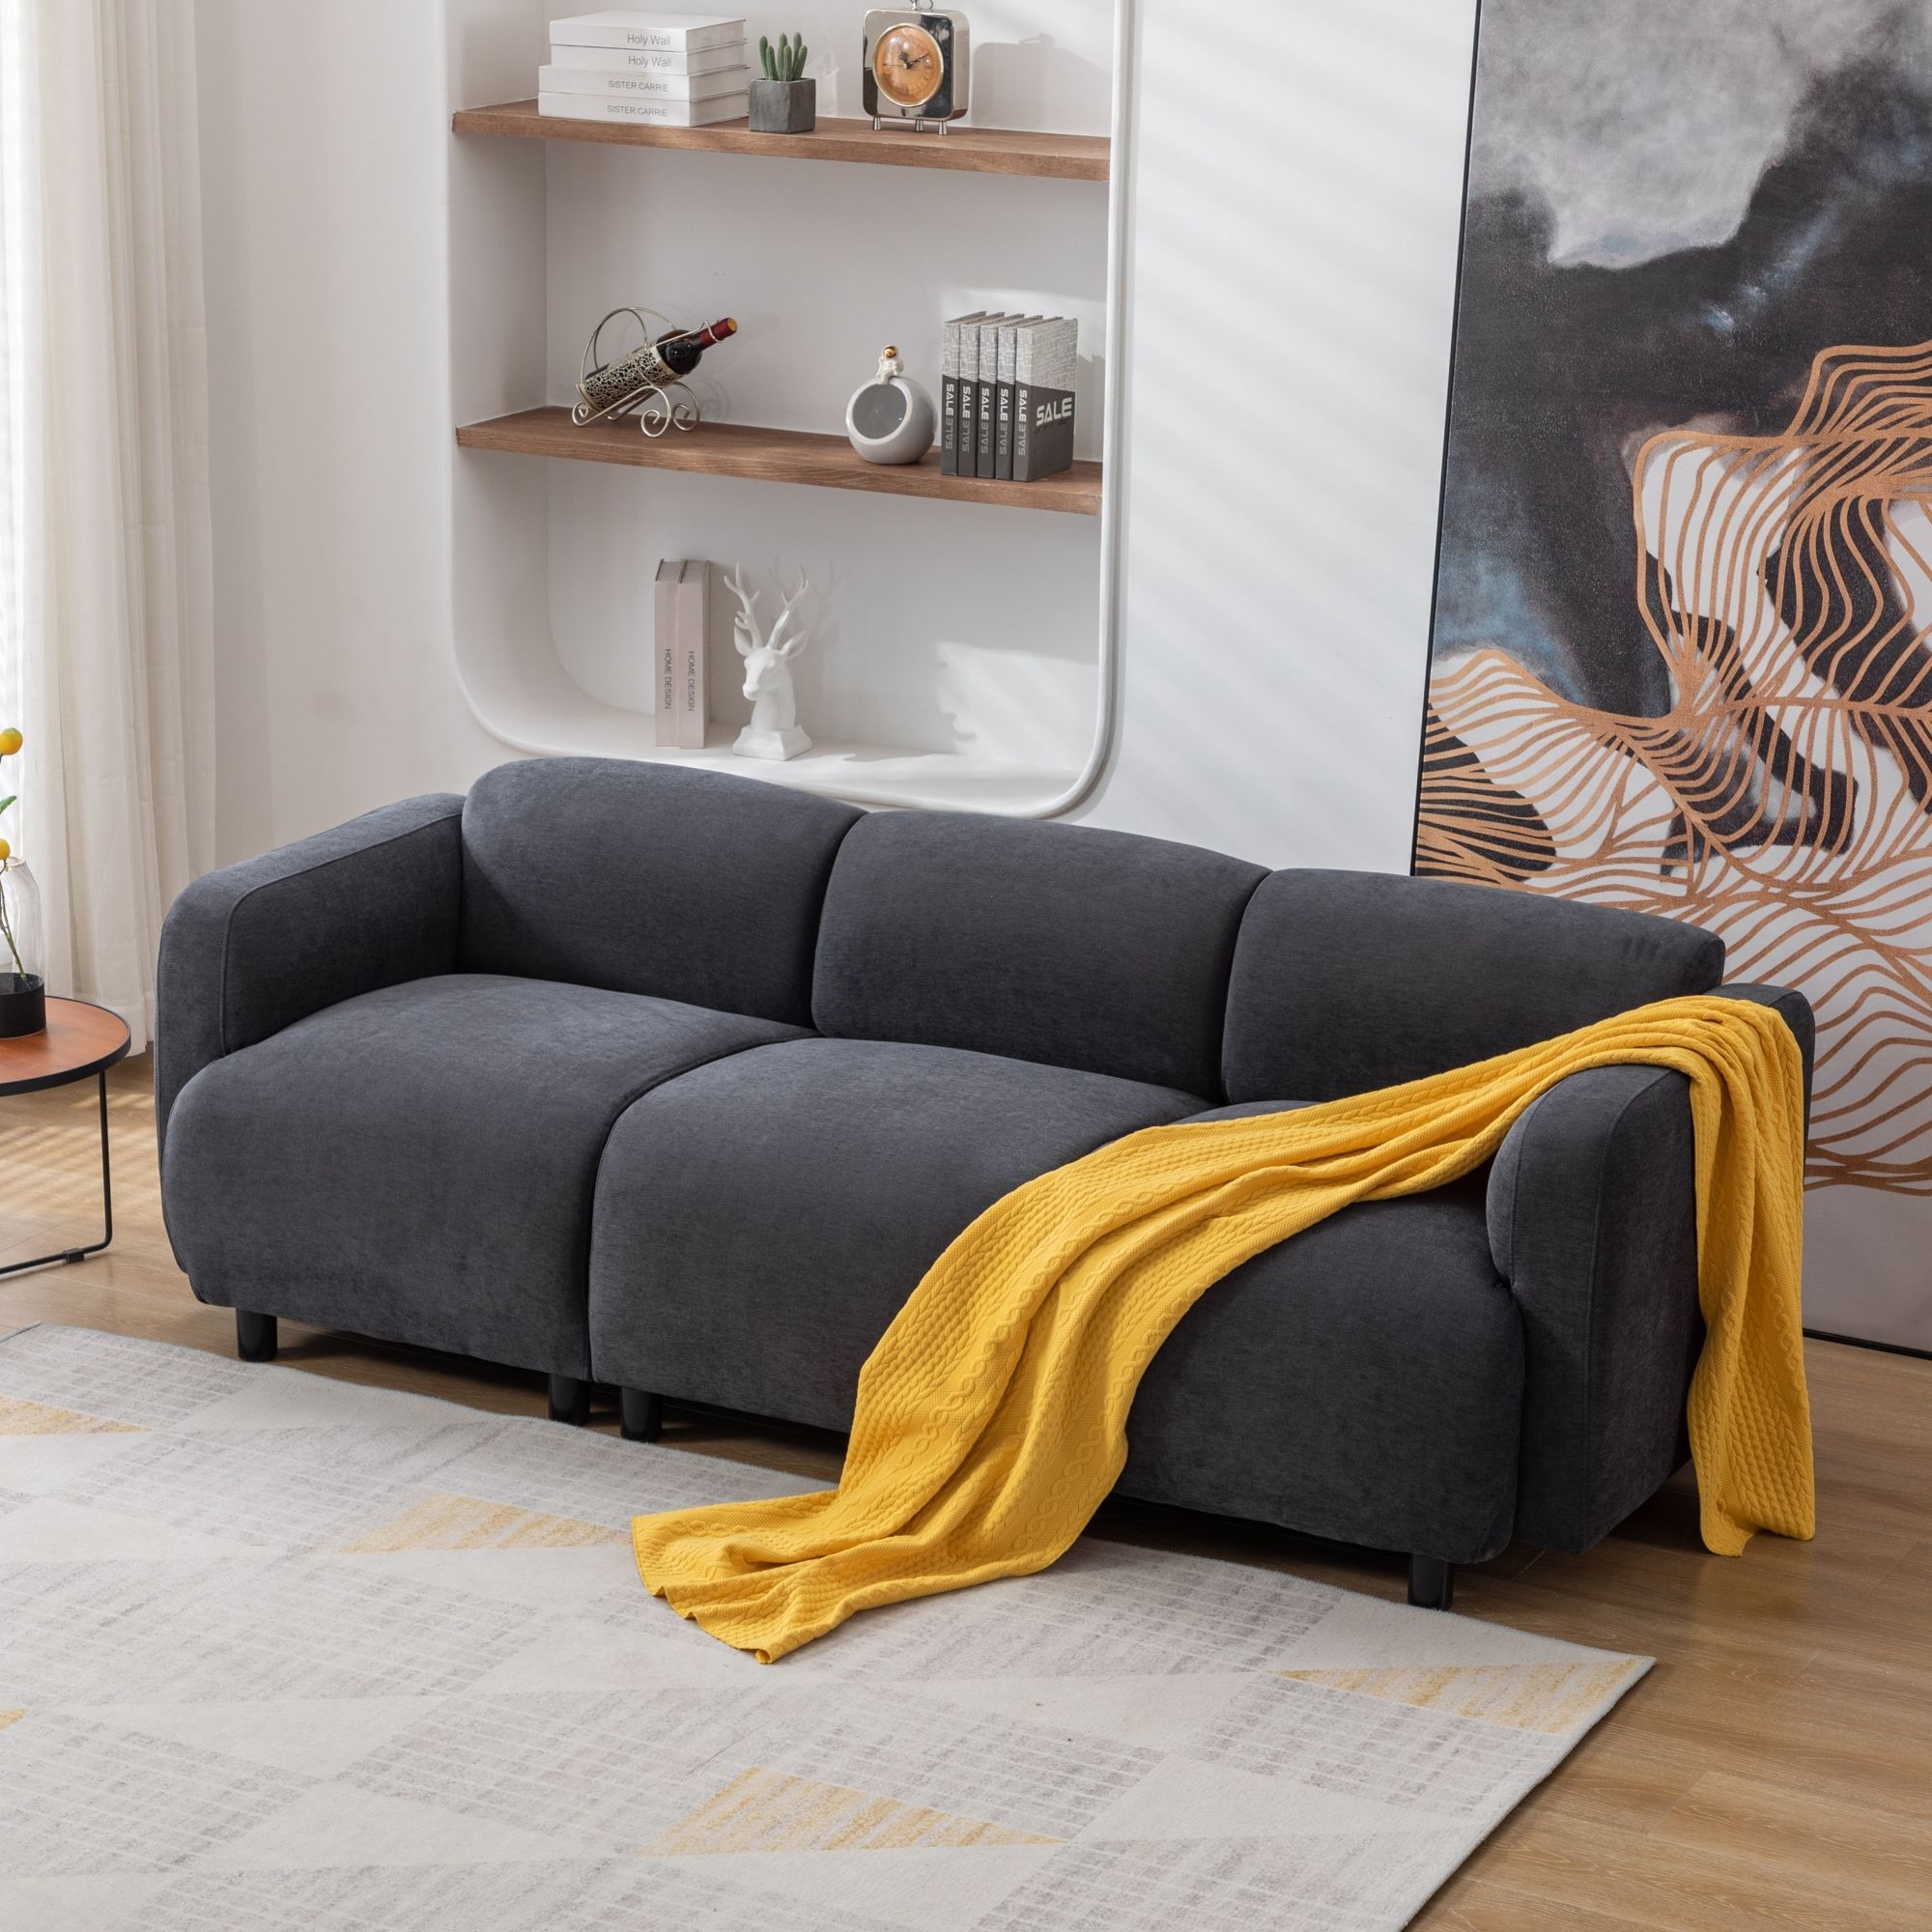 Livingroom 3 Seat Deep Cloud Sofa Sectional Couch Modern Polyester Fabric  Sofa With 12 Support Legs For Living Room, Dark Grey – Bed Bath & Beyond –  37980562 Intended For Dark Grey Polyester Sofa Couches (View 3 of 15)